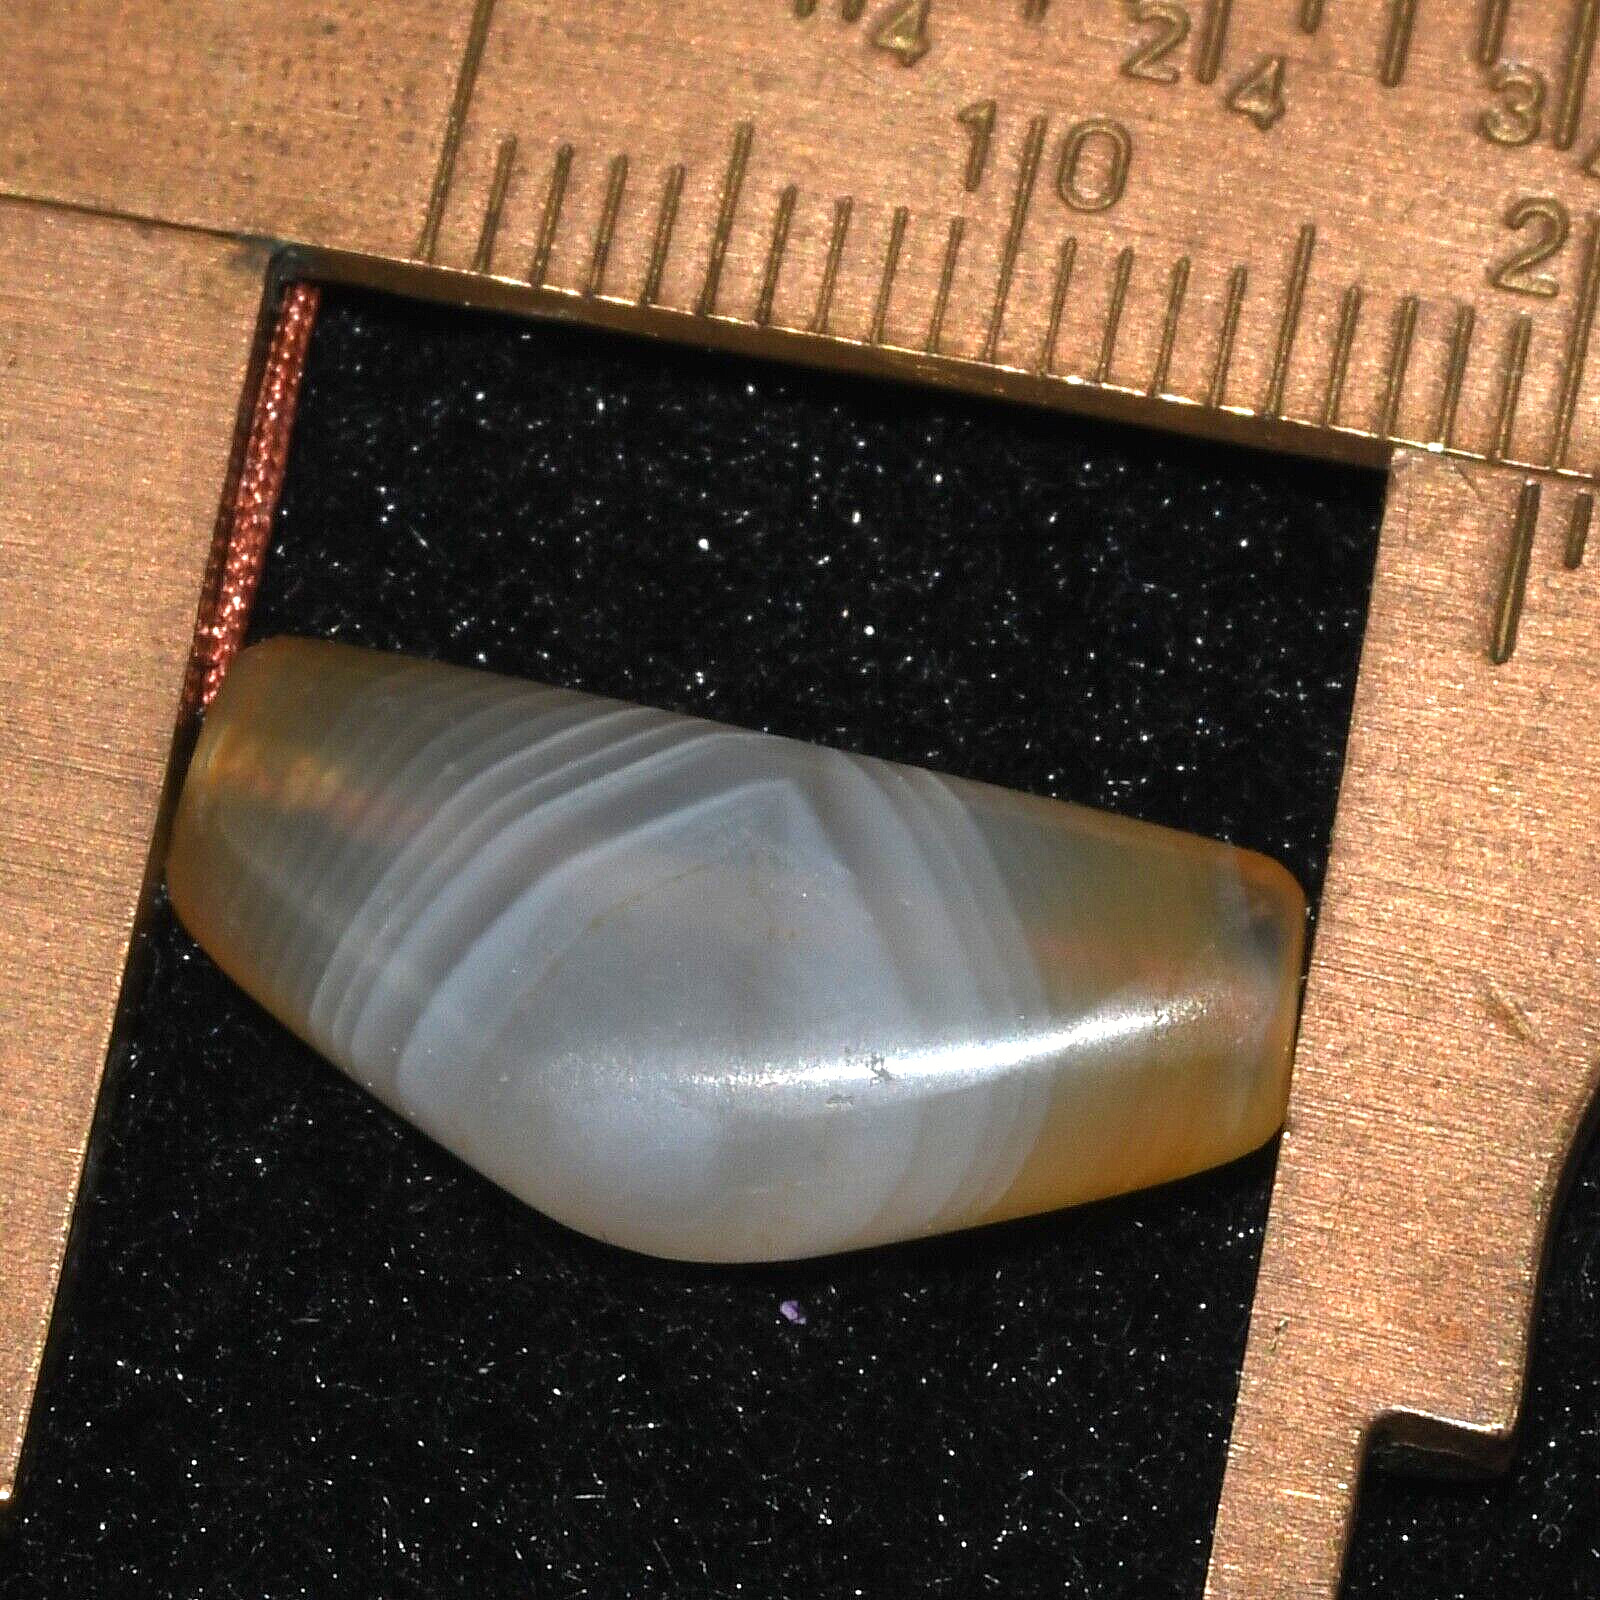 Ancient Old Banded Agate Bactrian bead in good Condition over 1500 Years Old